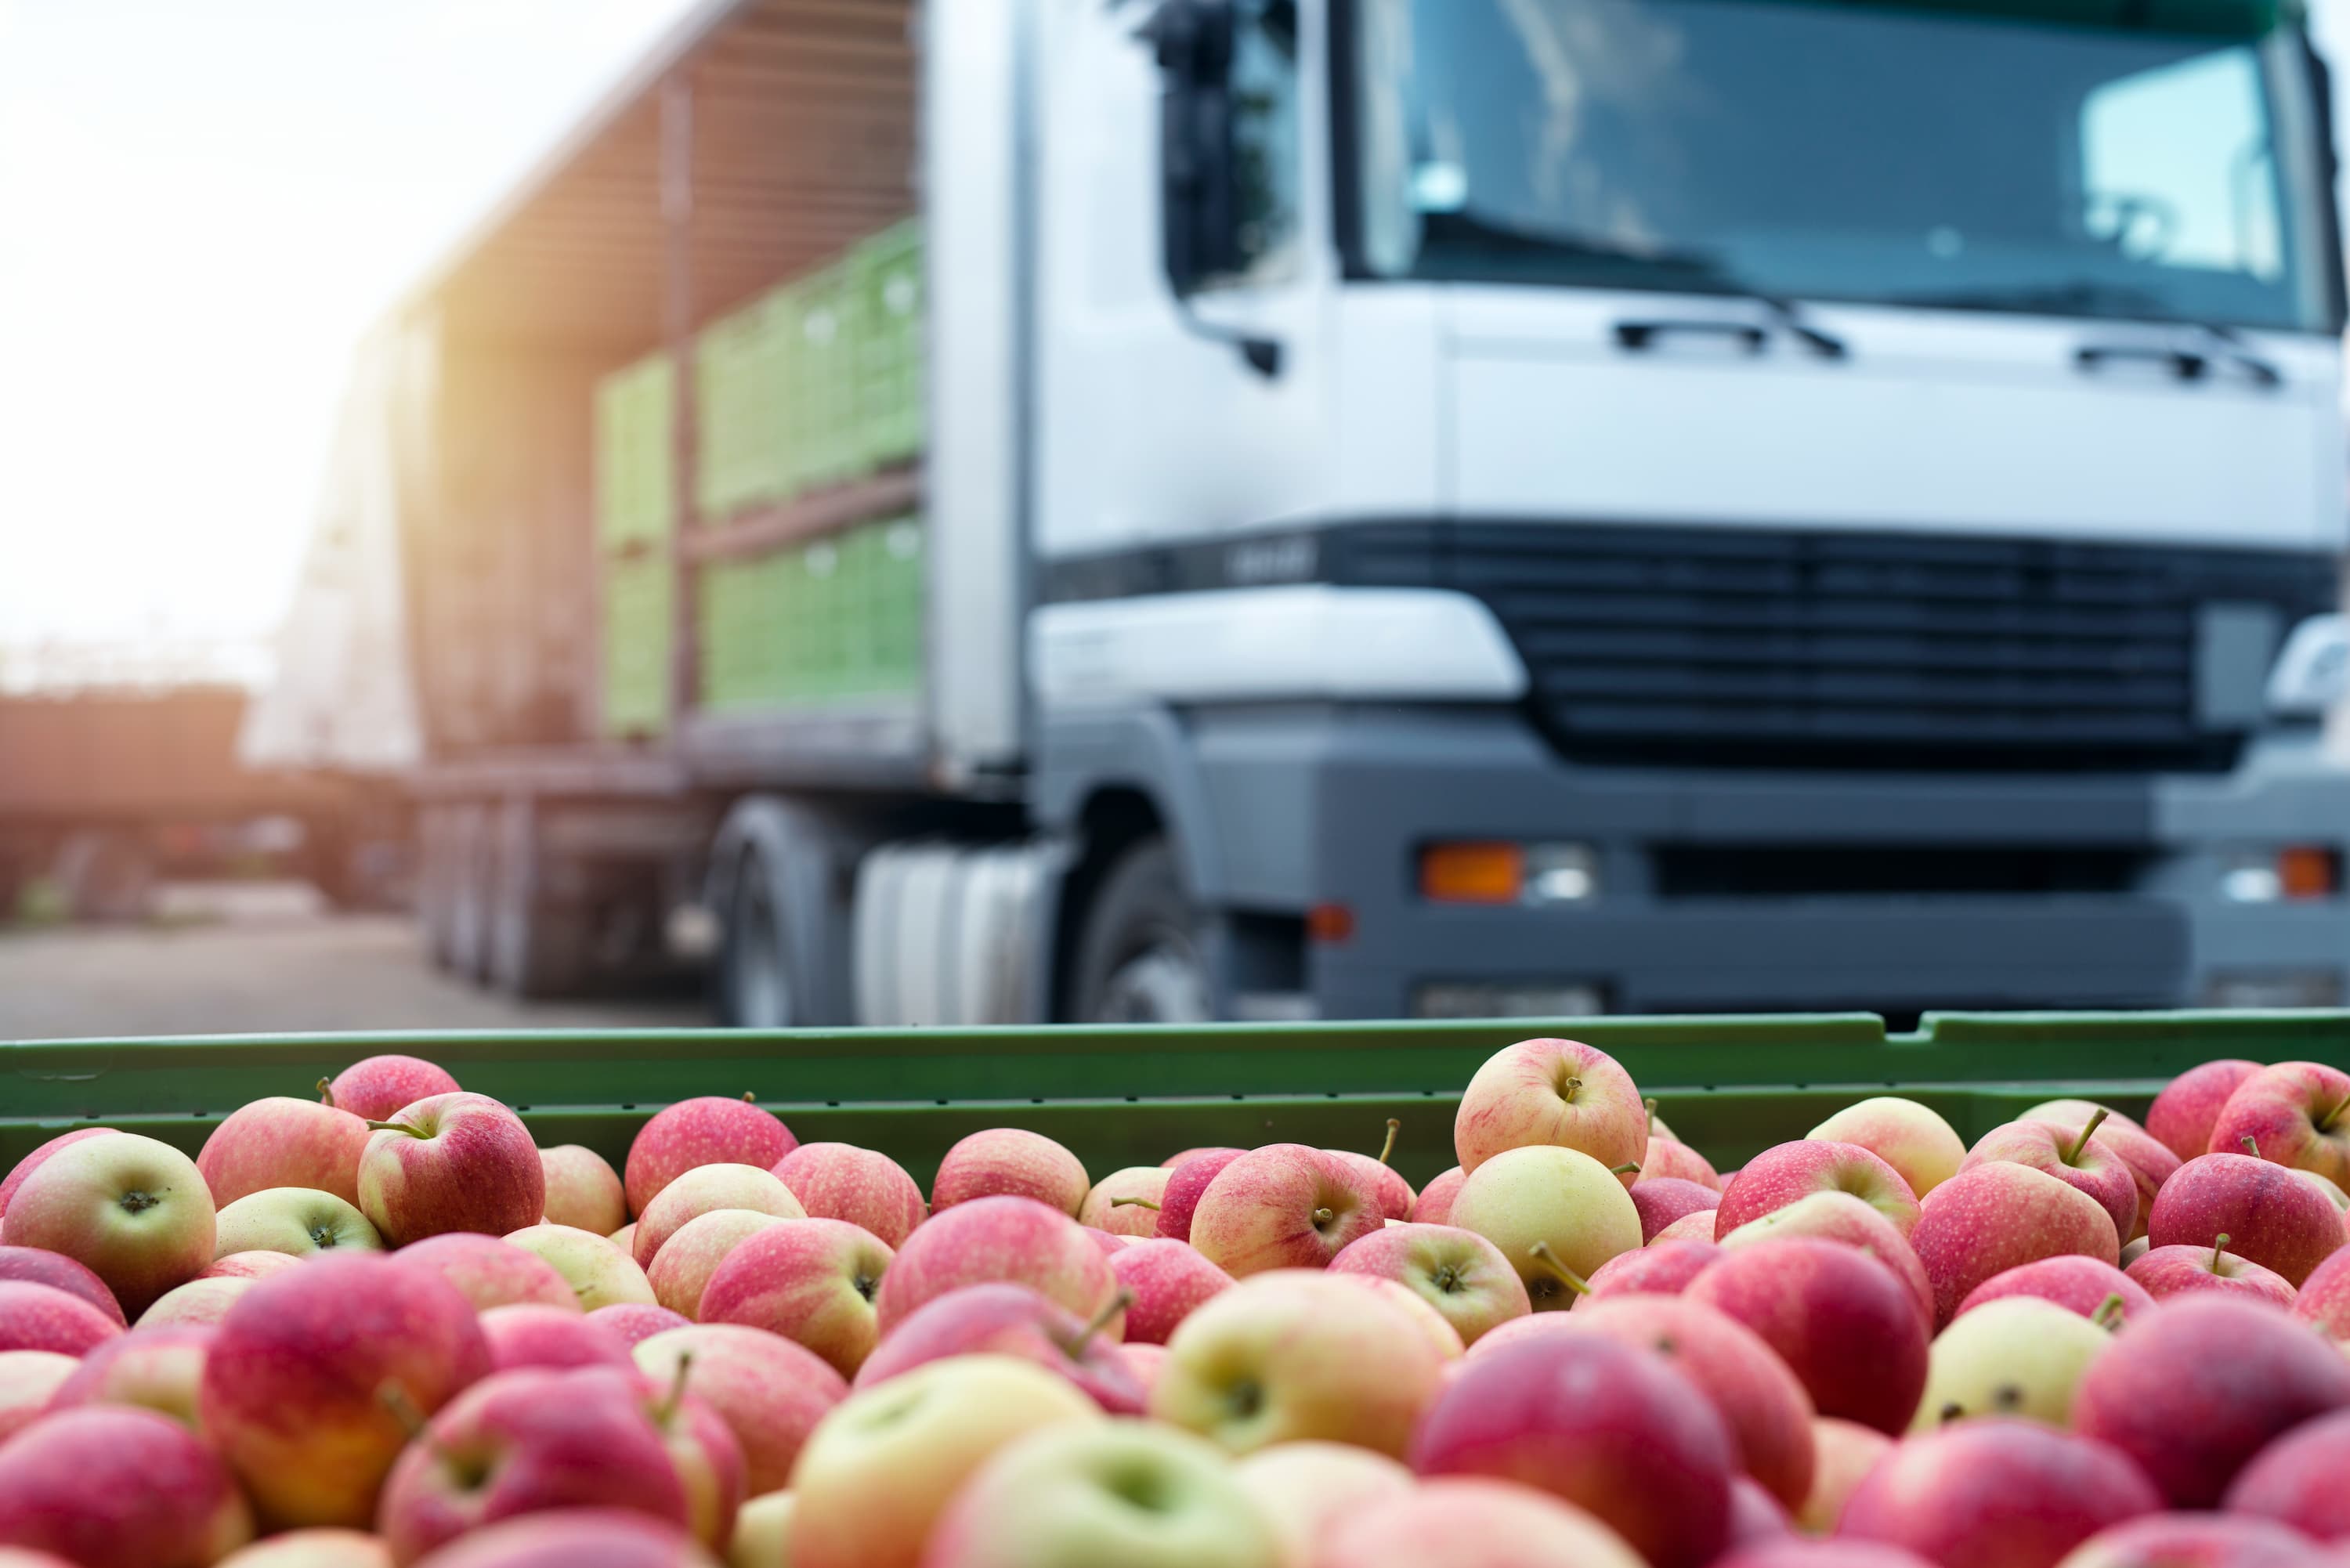 https://www.freshproduce.com/siteassets/images/tech/apples-loaded-to-refrigerated-truck.jpg